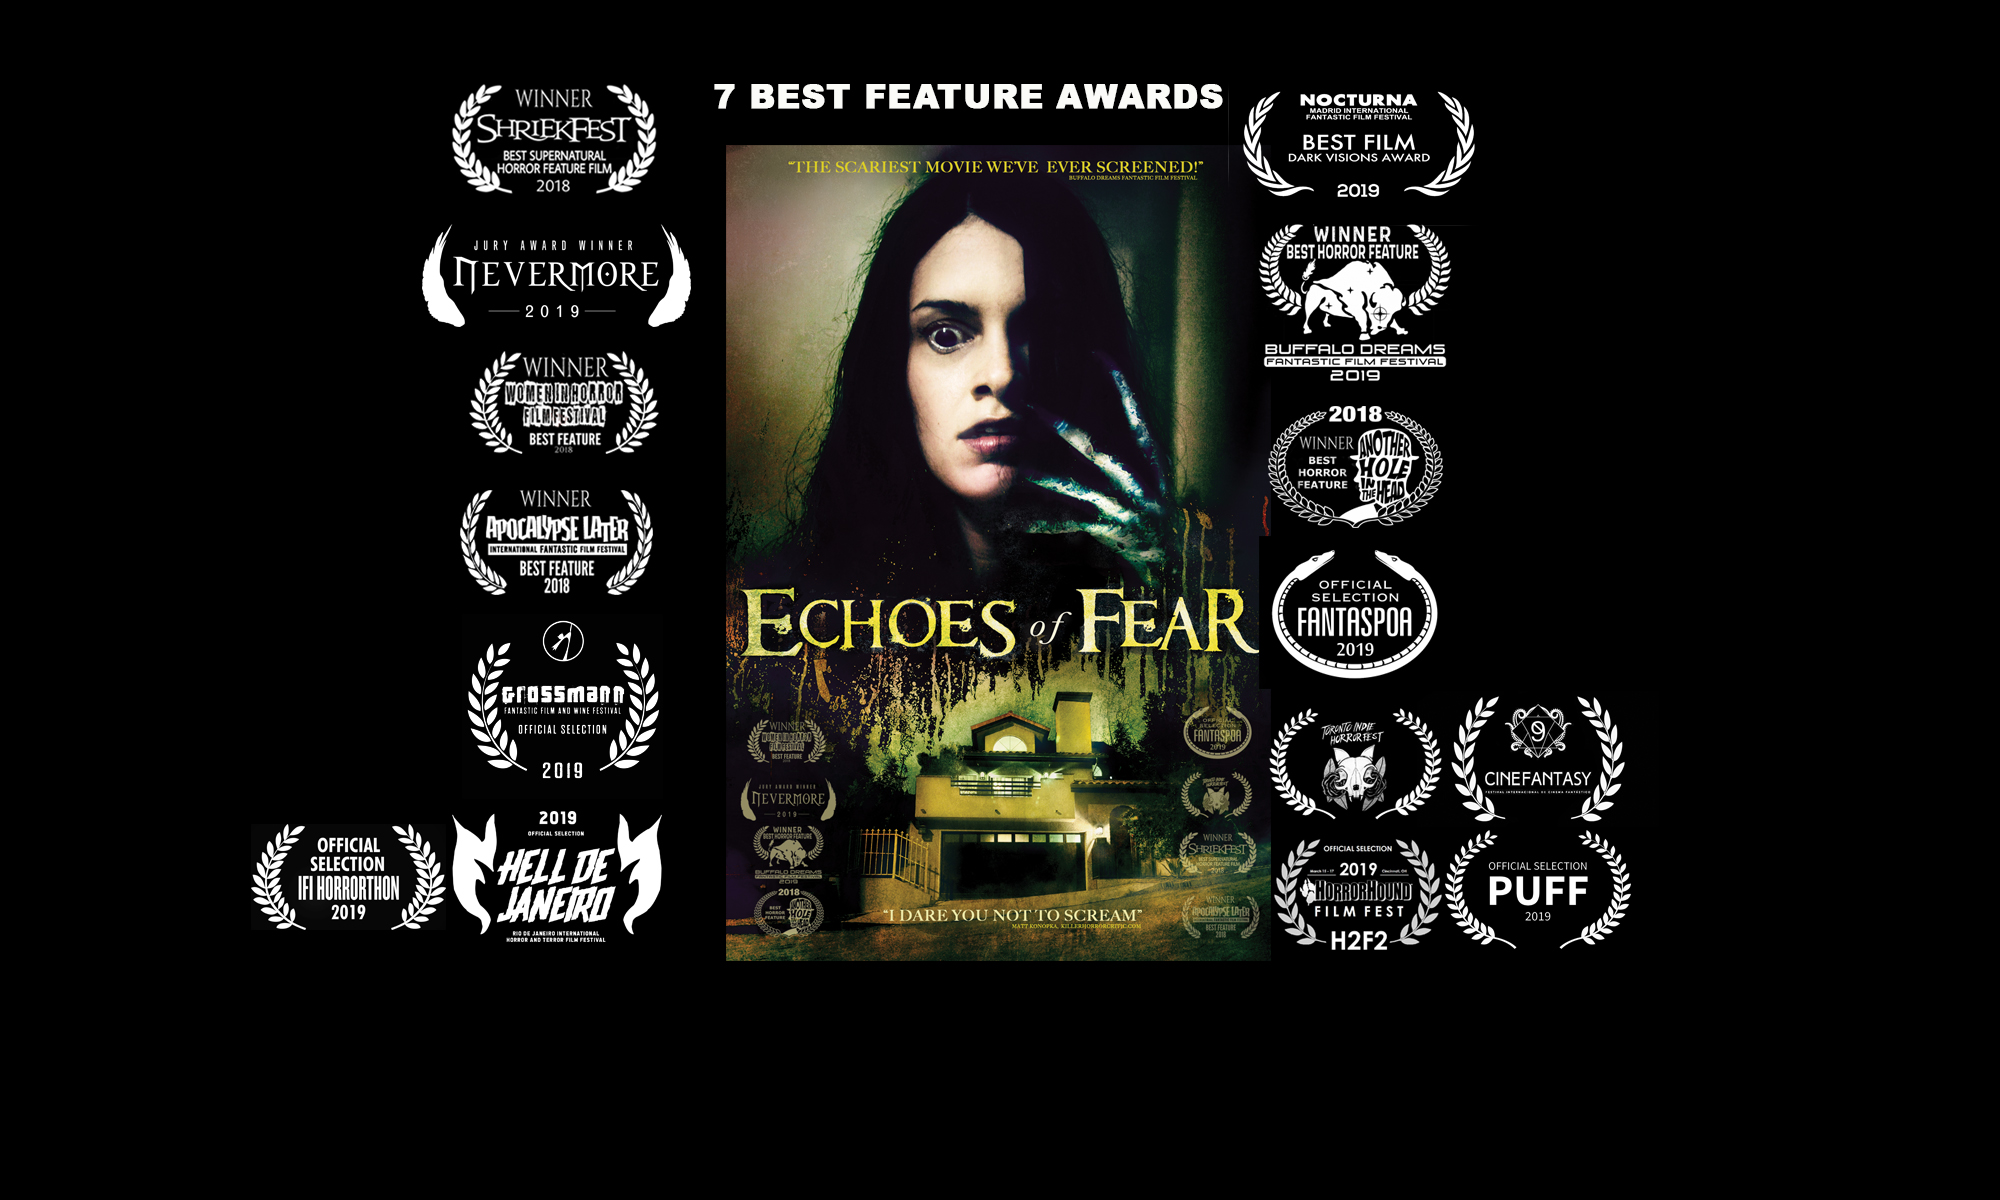 ECHOES OF FEAR